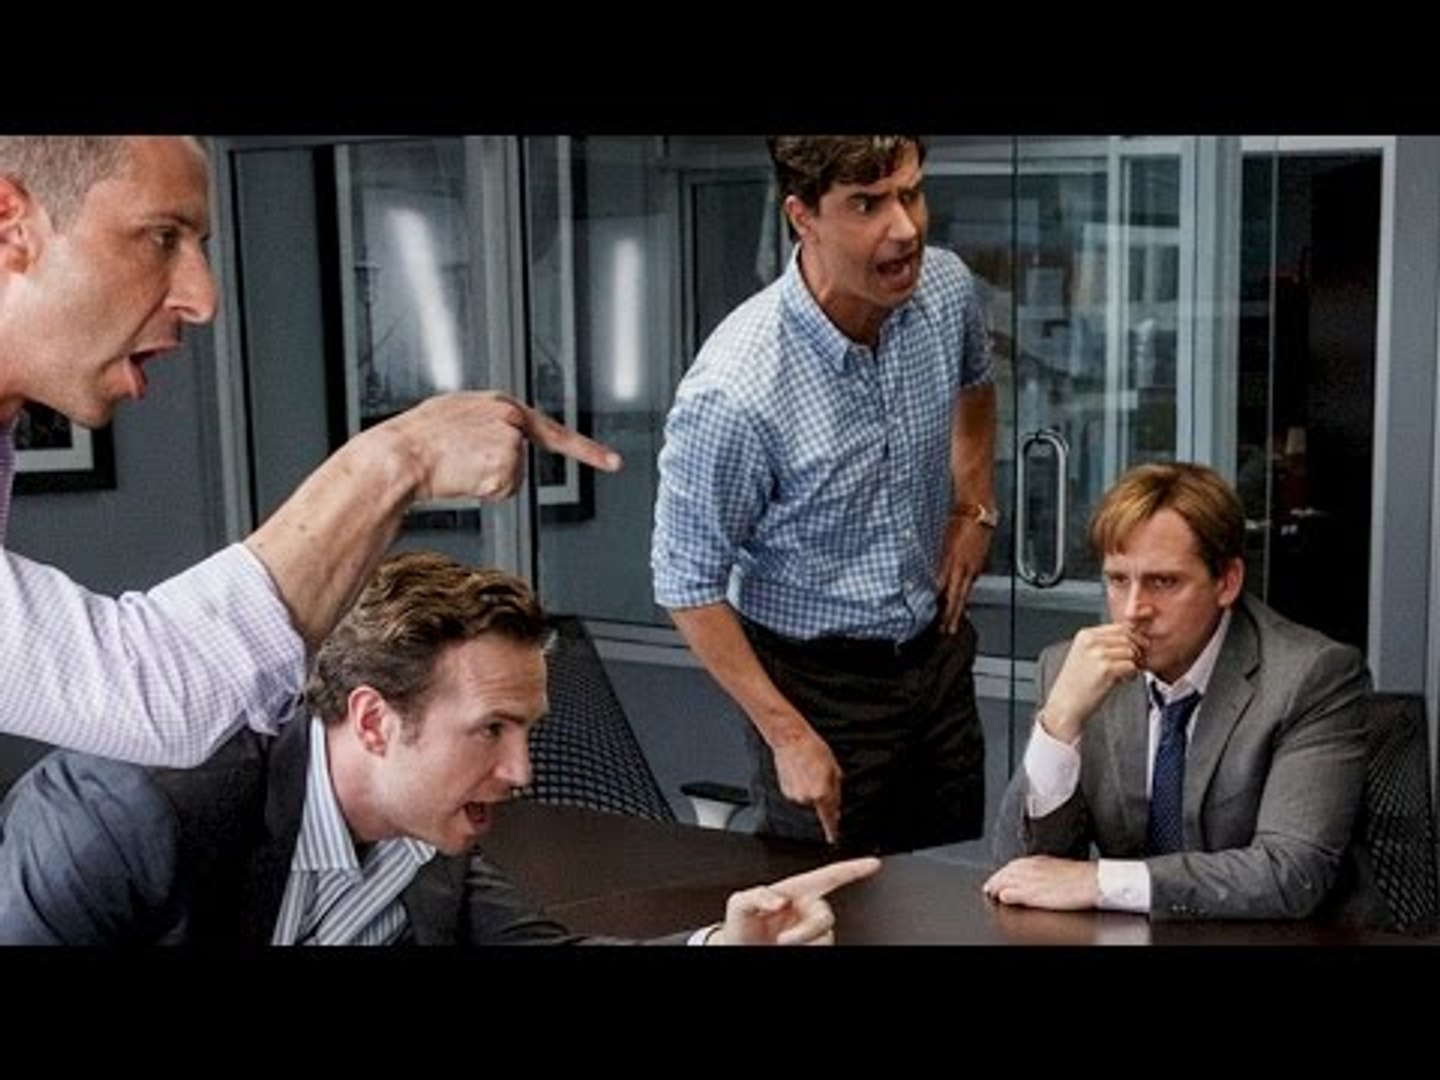 THE BIG SHORT Movie Clip # 2 - video Dailymotion